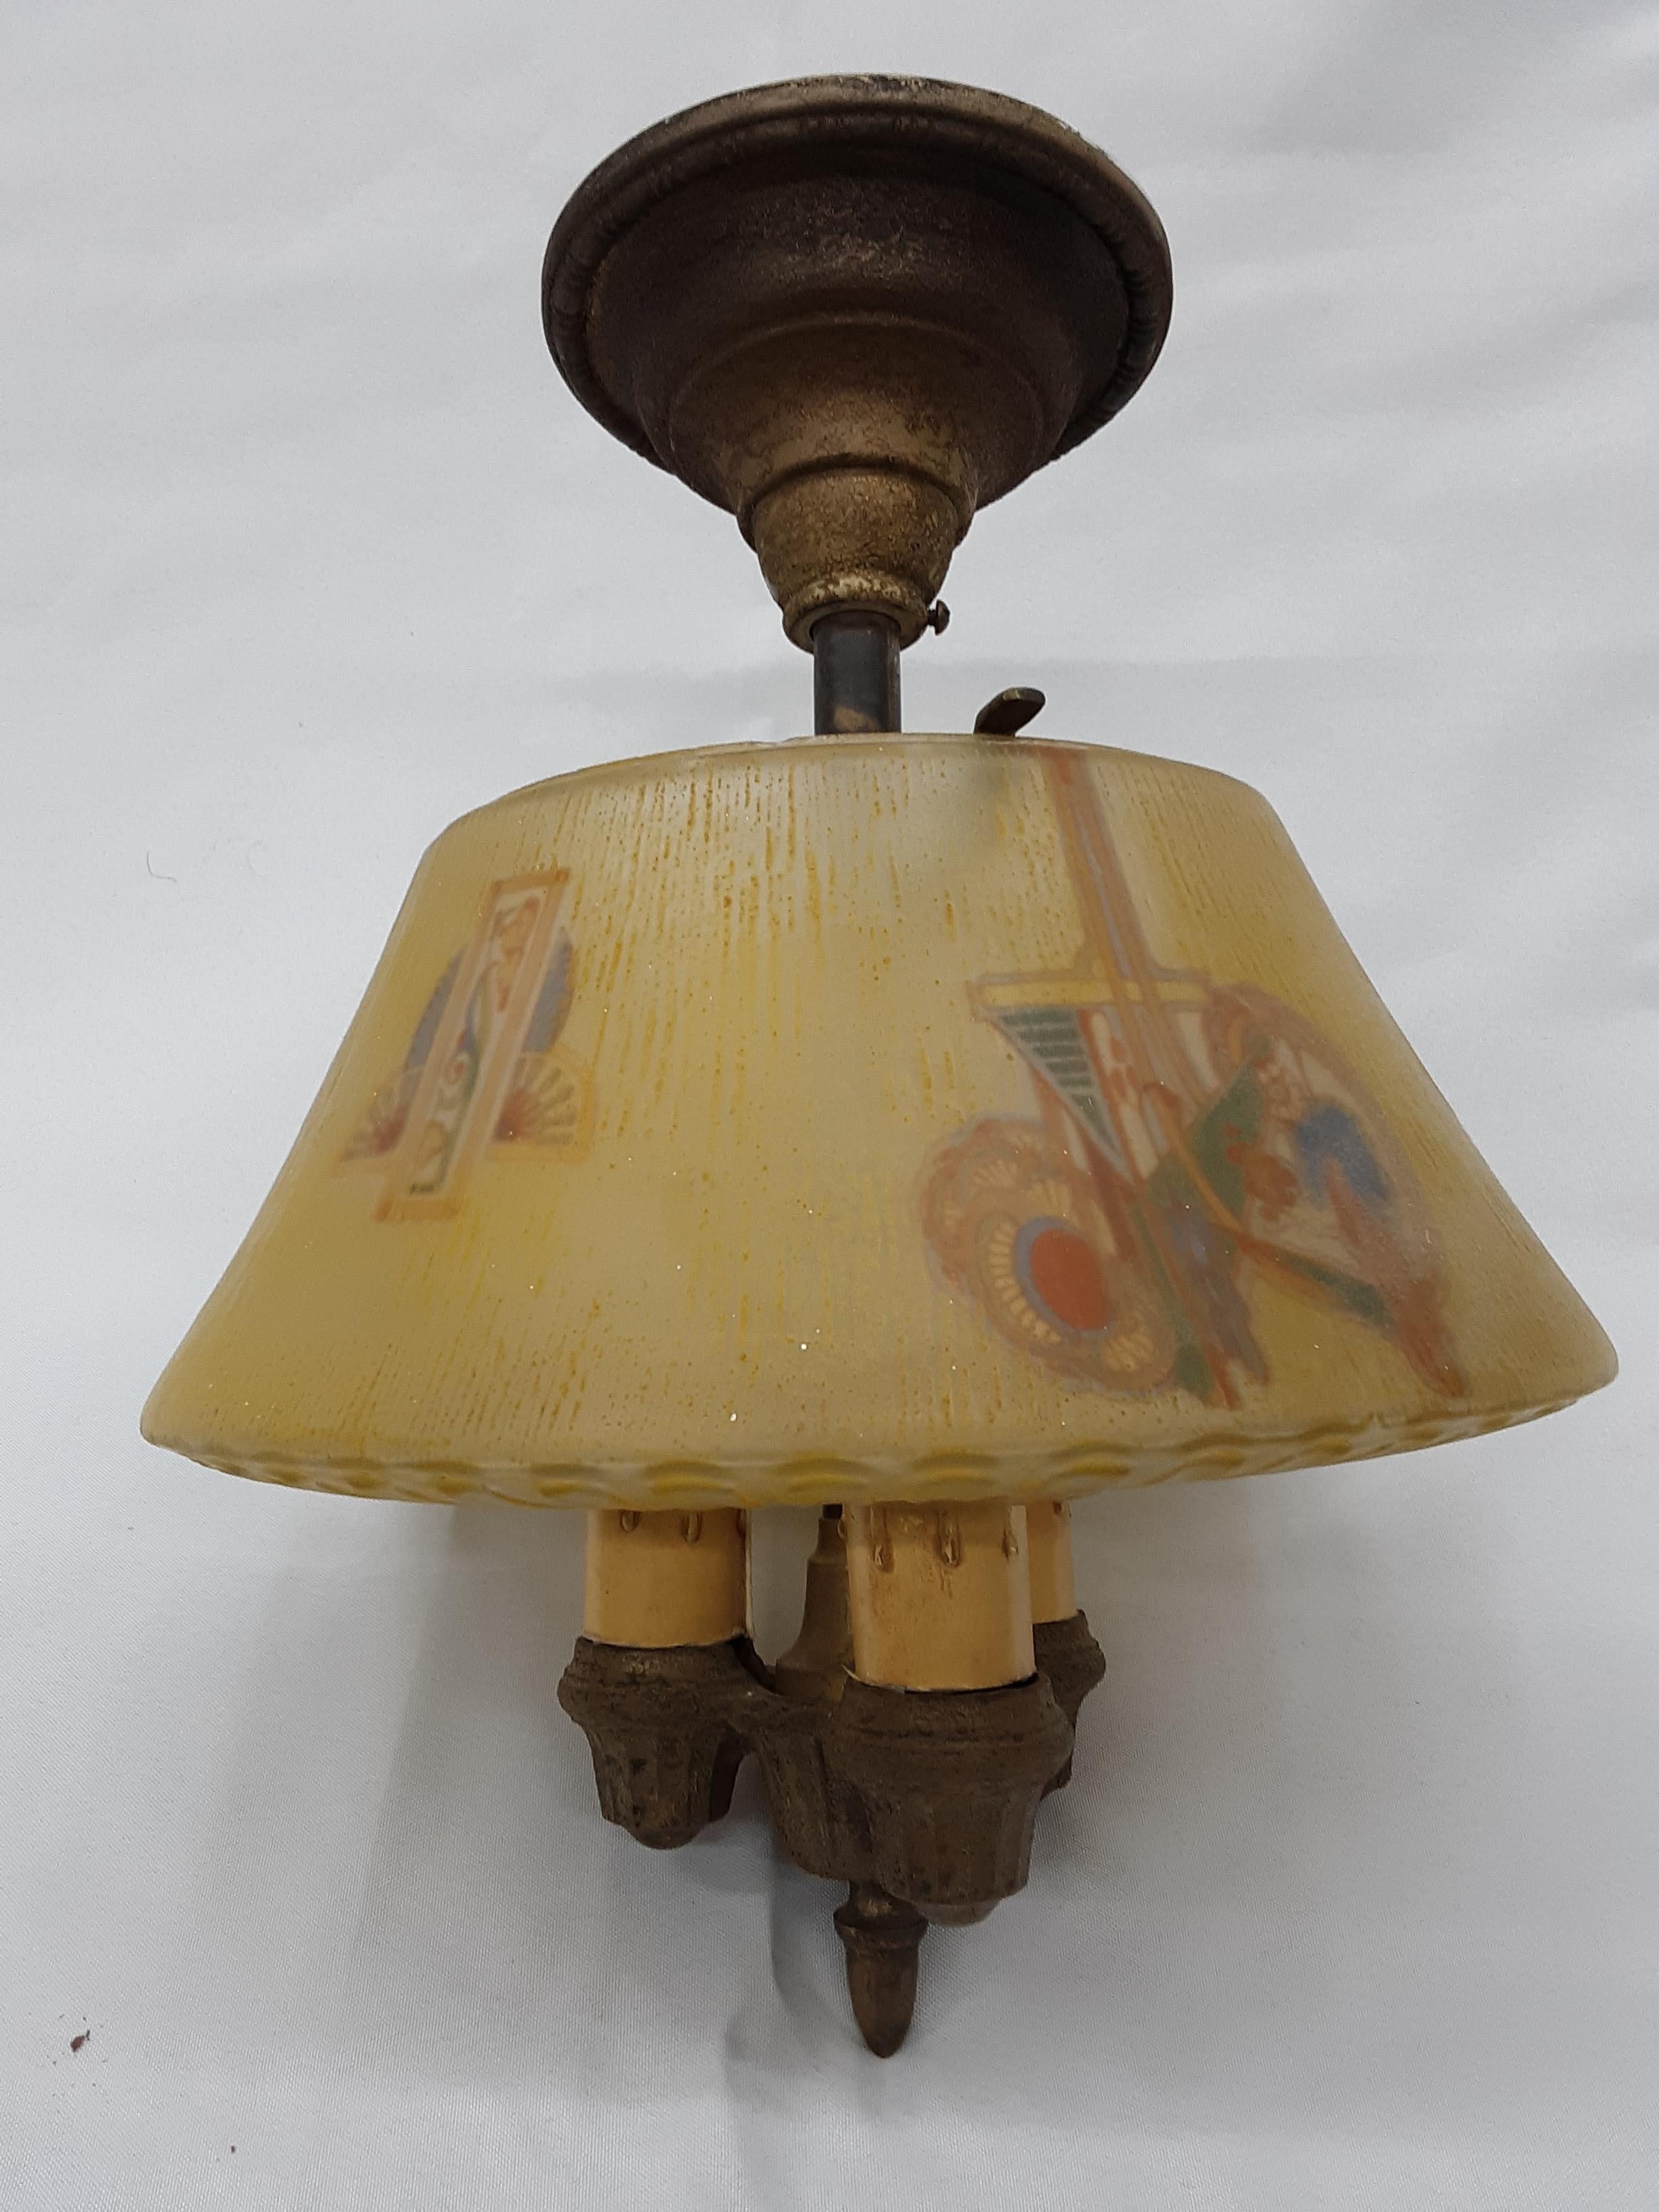 This is an incredibly unique 1950 lighting set. Painted glass and a true antique collectors pick.